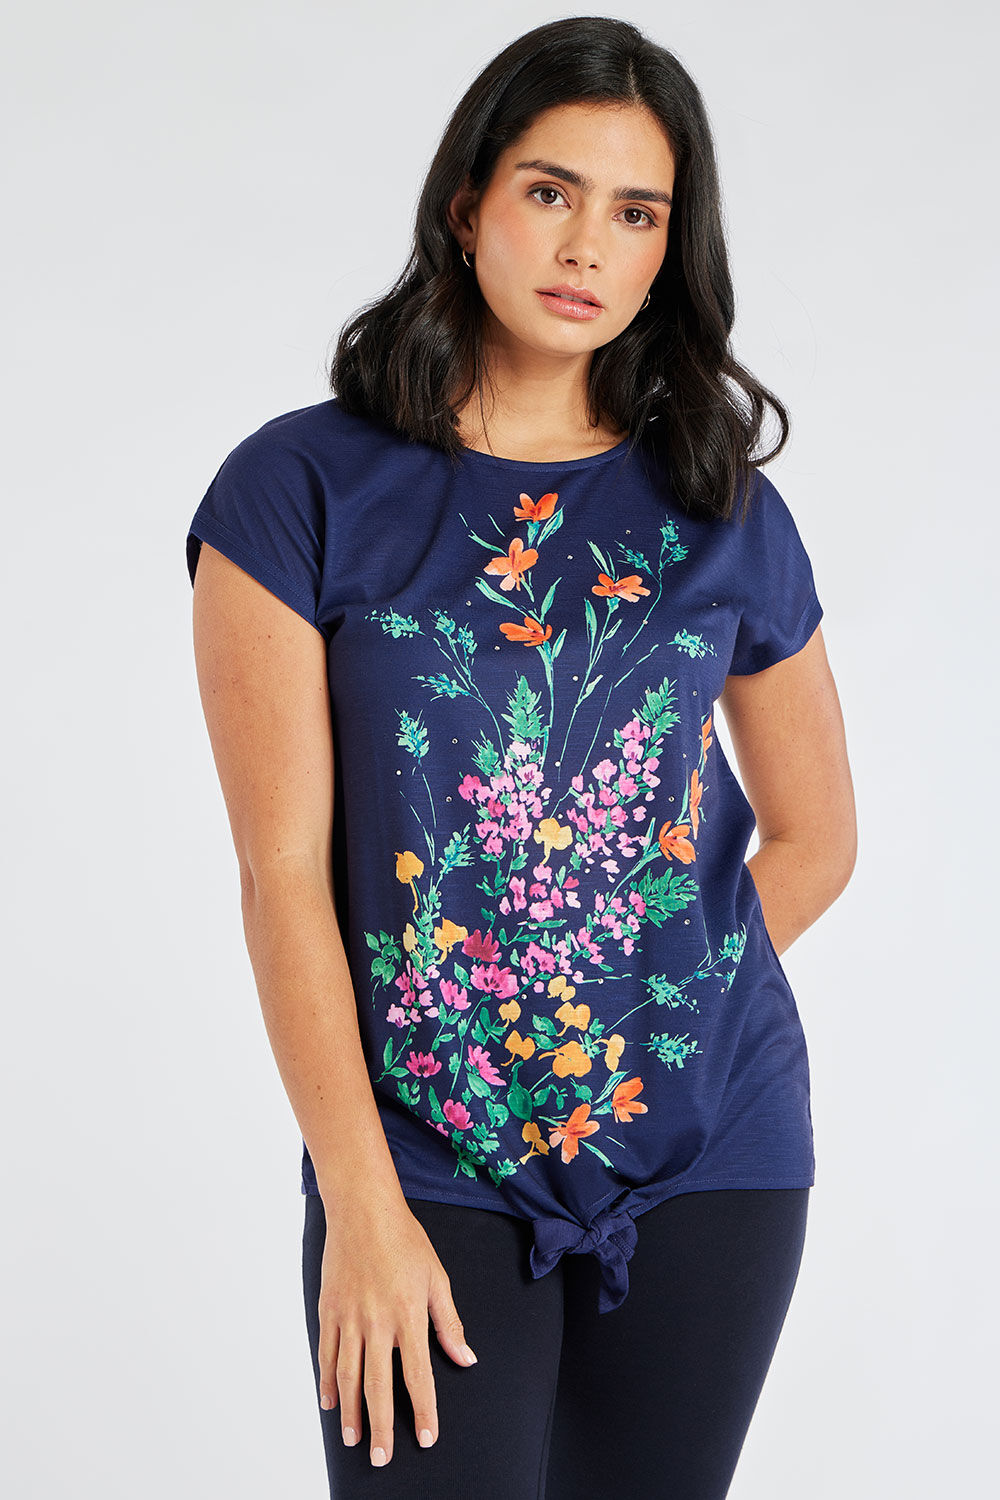 Bonmarche Navy Short Sleeve Sprig Floral Print T-Shirt With Tie Front, Size: 20